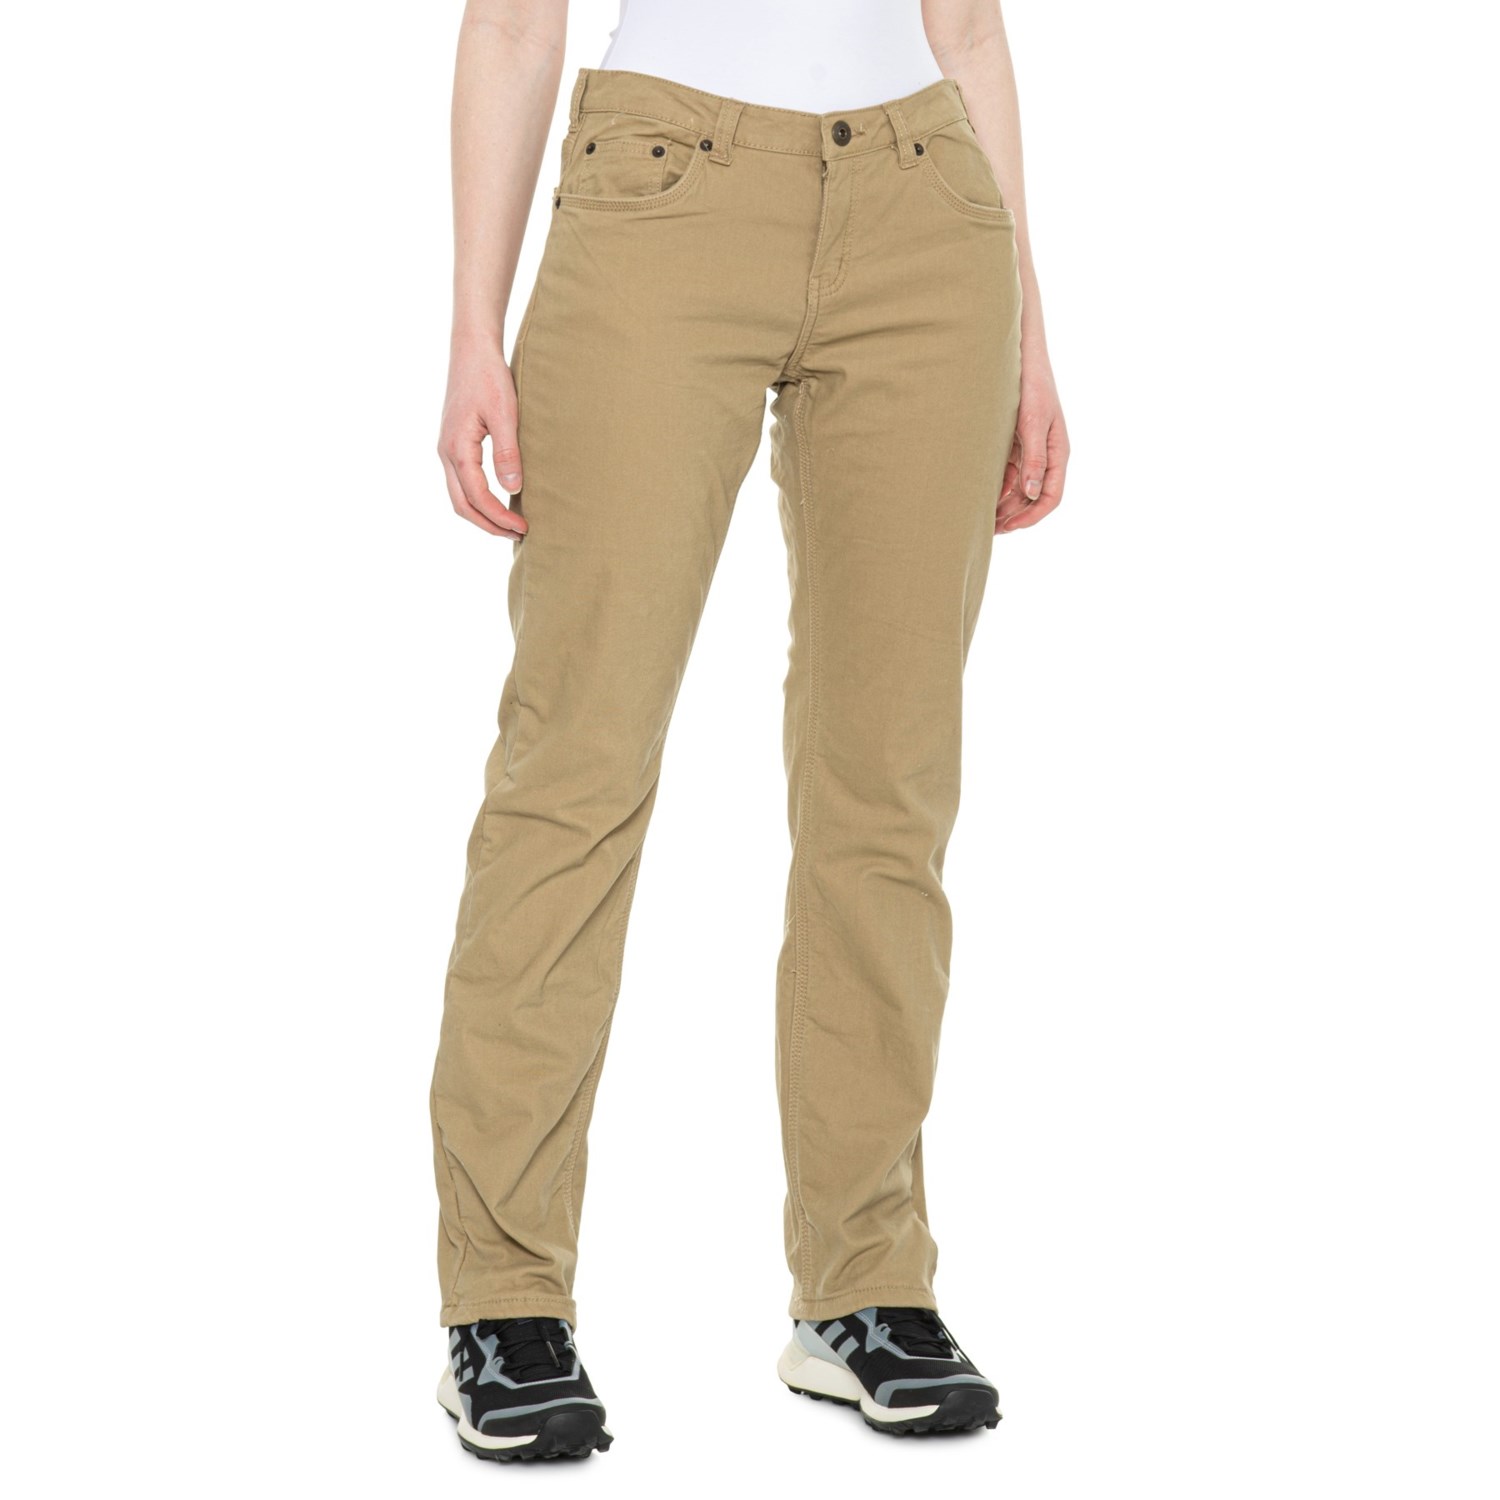 Telluride Canvas Pants (For Women) - Save 60%